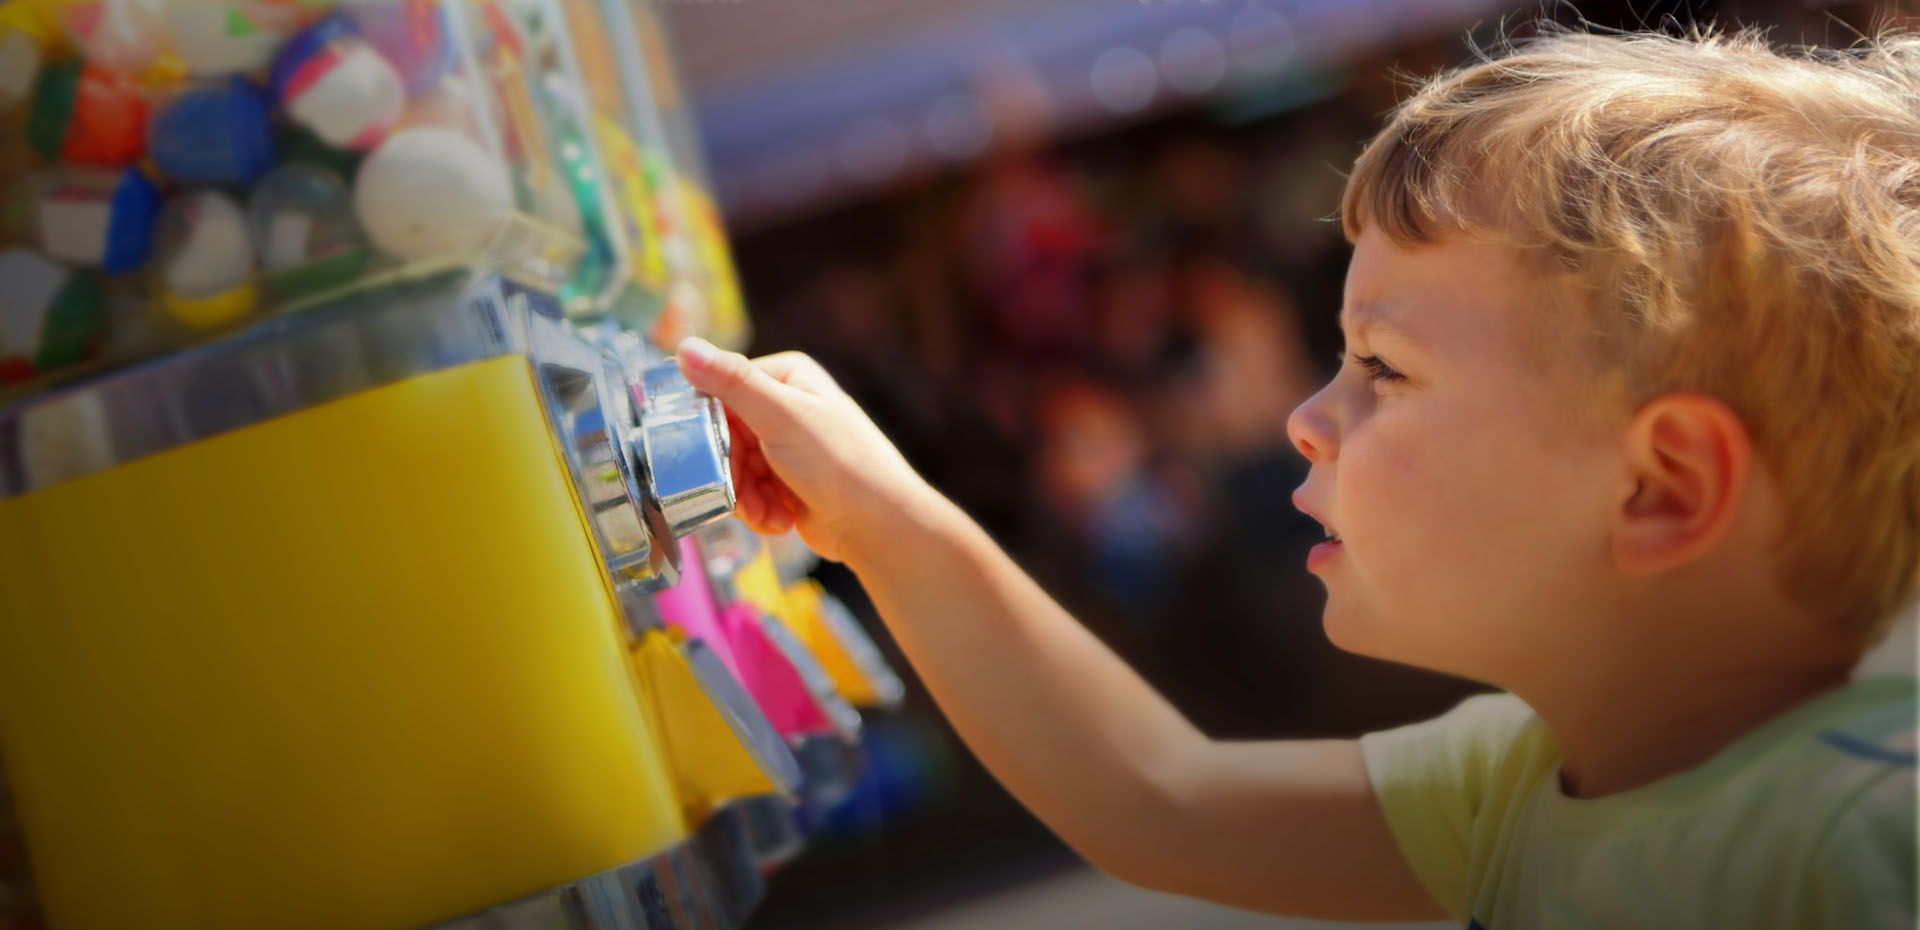 Installers Of Toys Vending Machines For Shopping Centres Peterborough